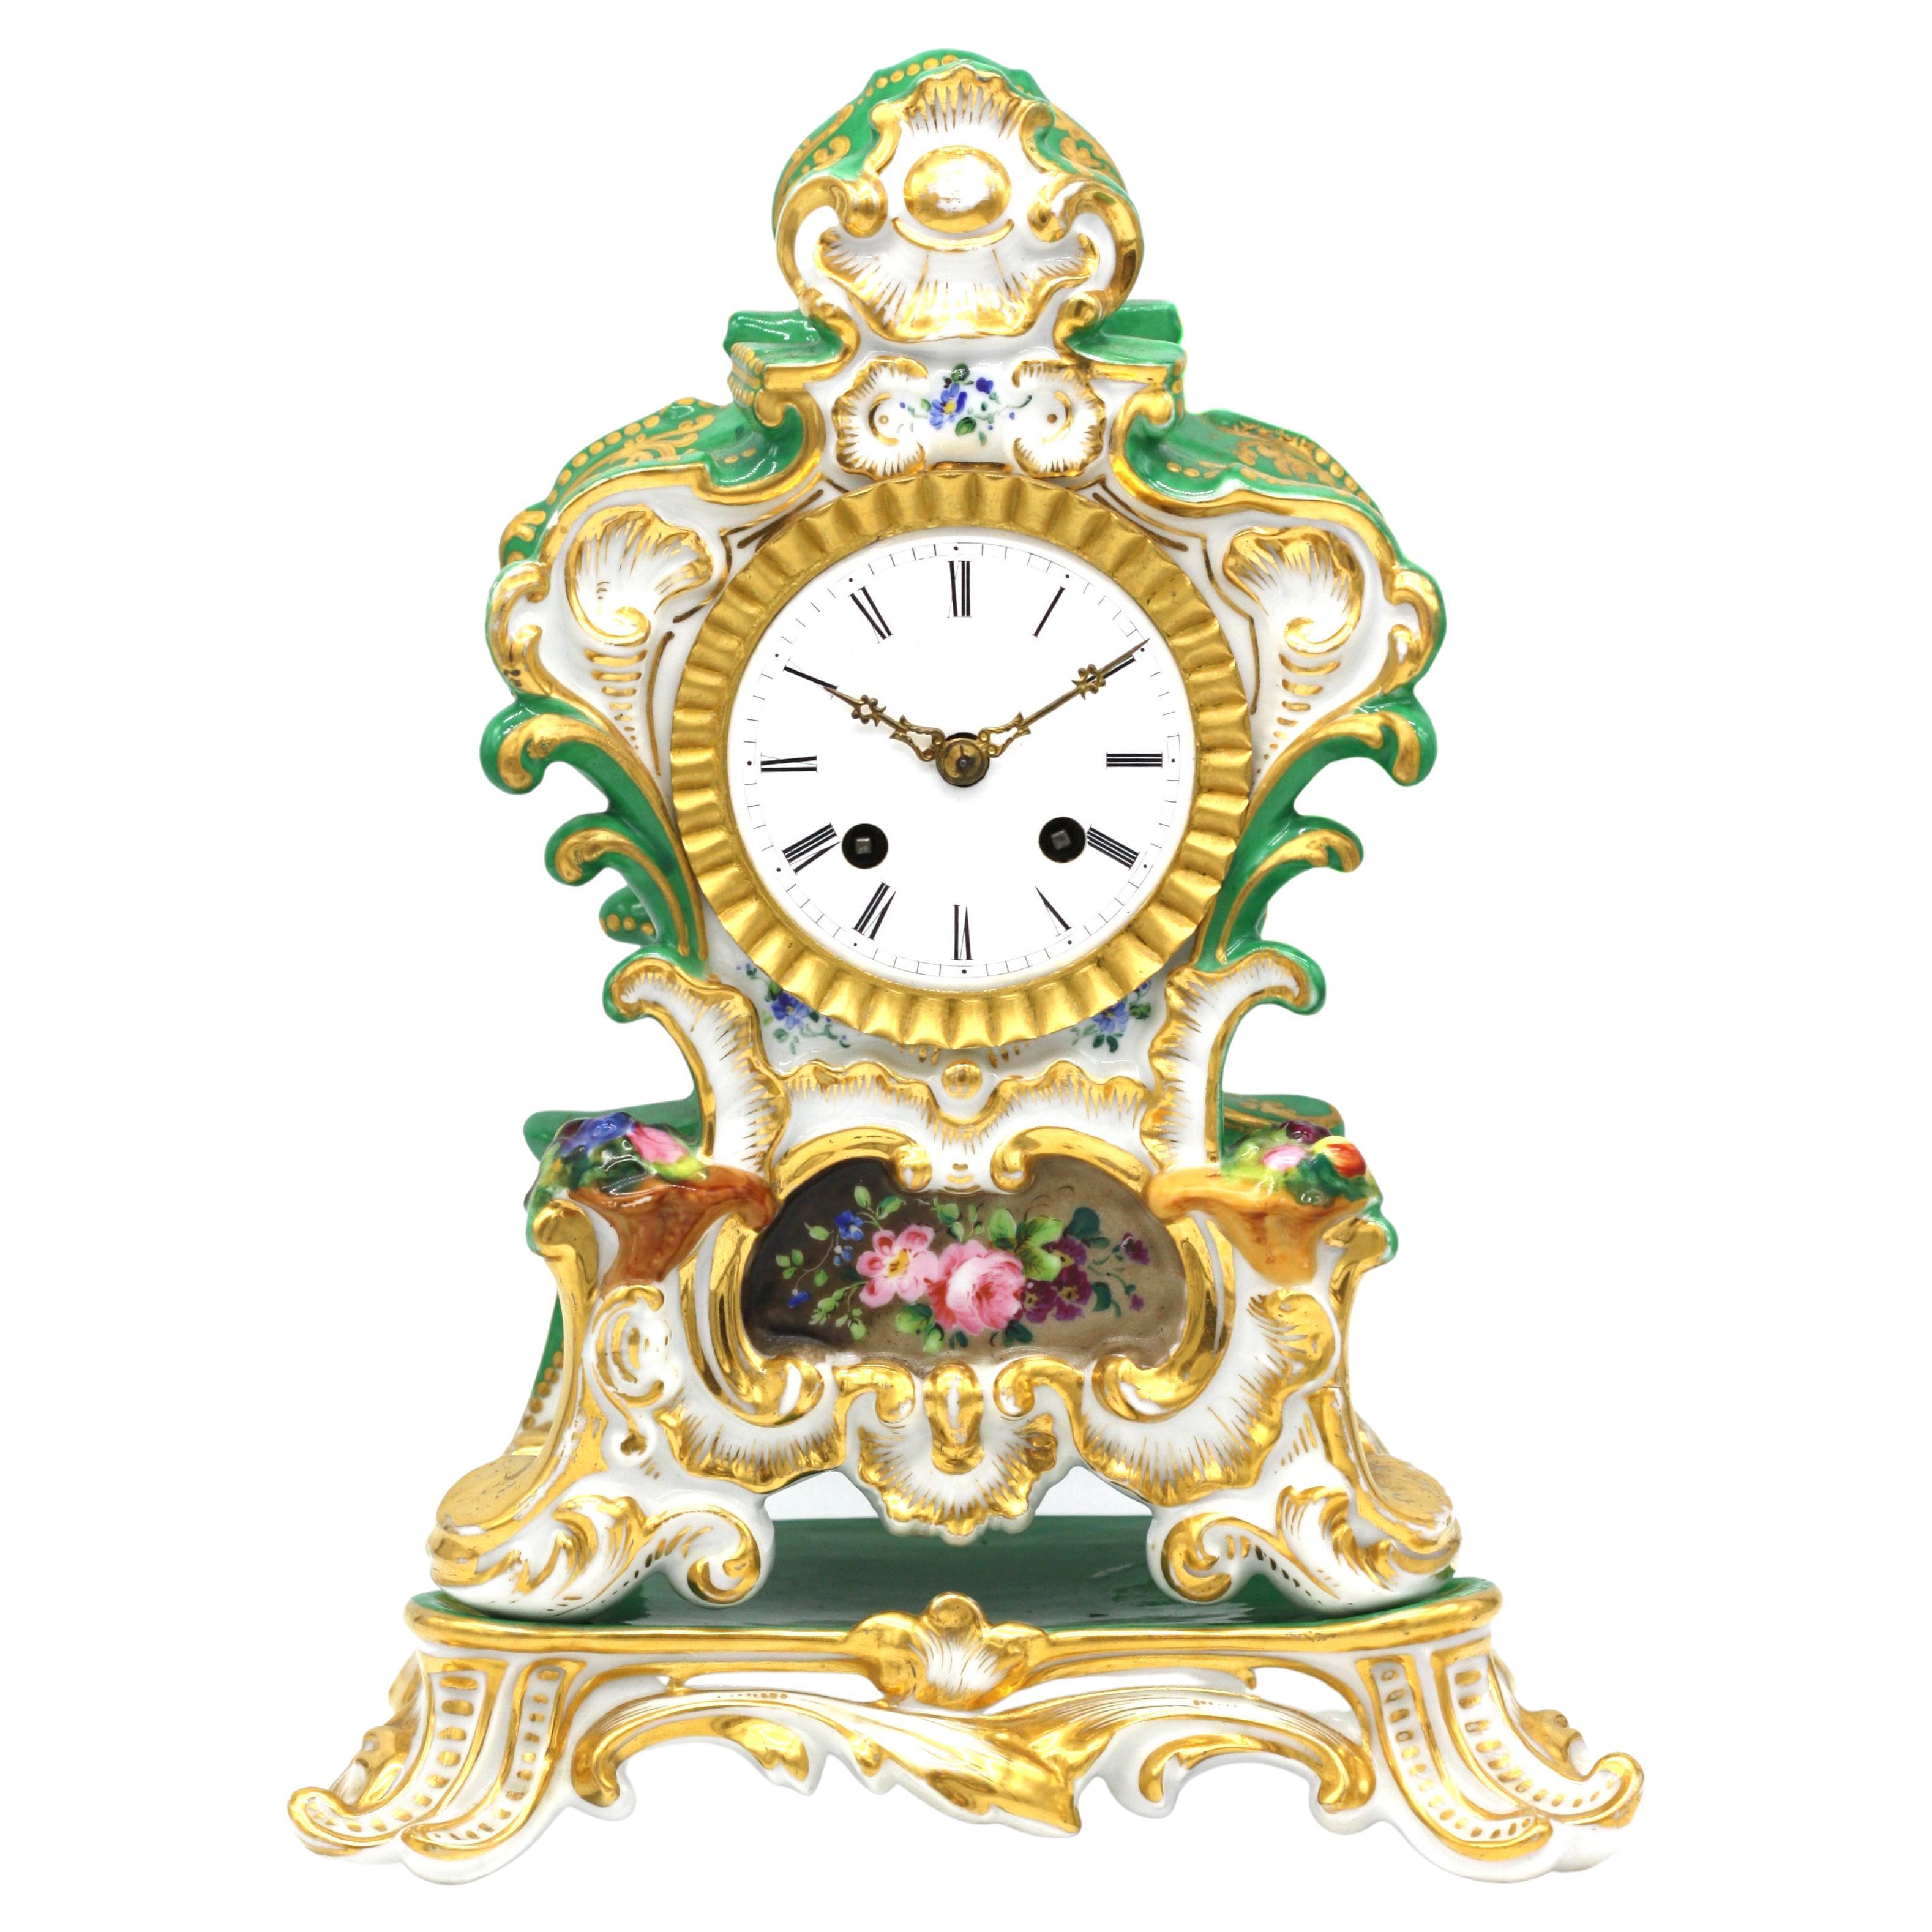 Old Paris Porcelain Mantel Clock and Stand, French, Late 19th Century